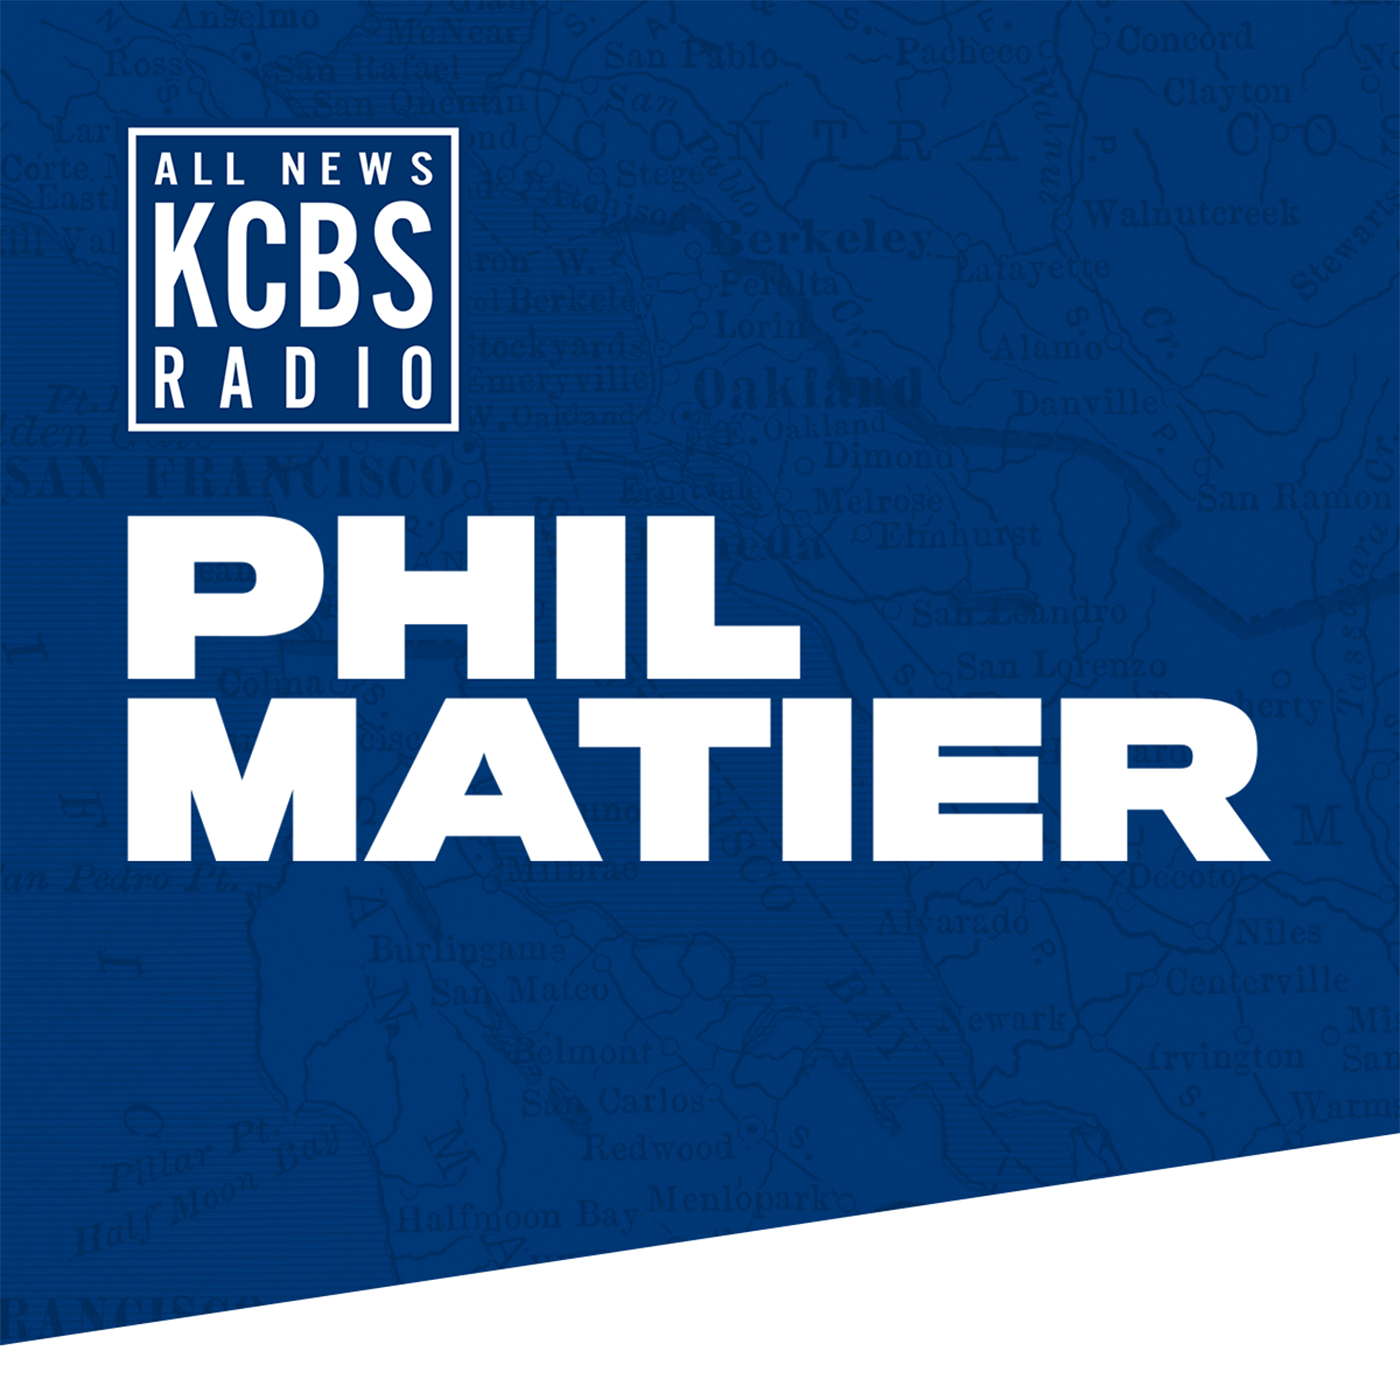 Phil Matier: GOP admits responsibility for illegal ballot boxes